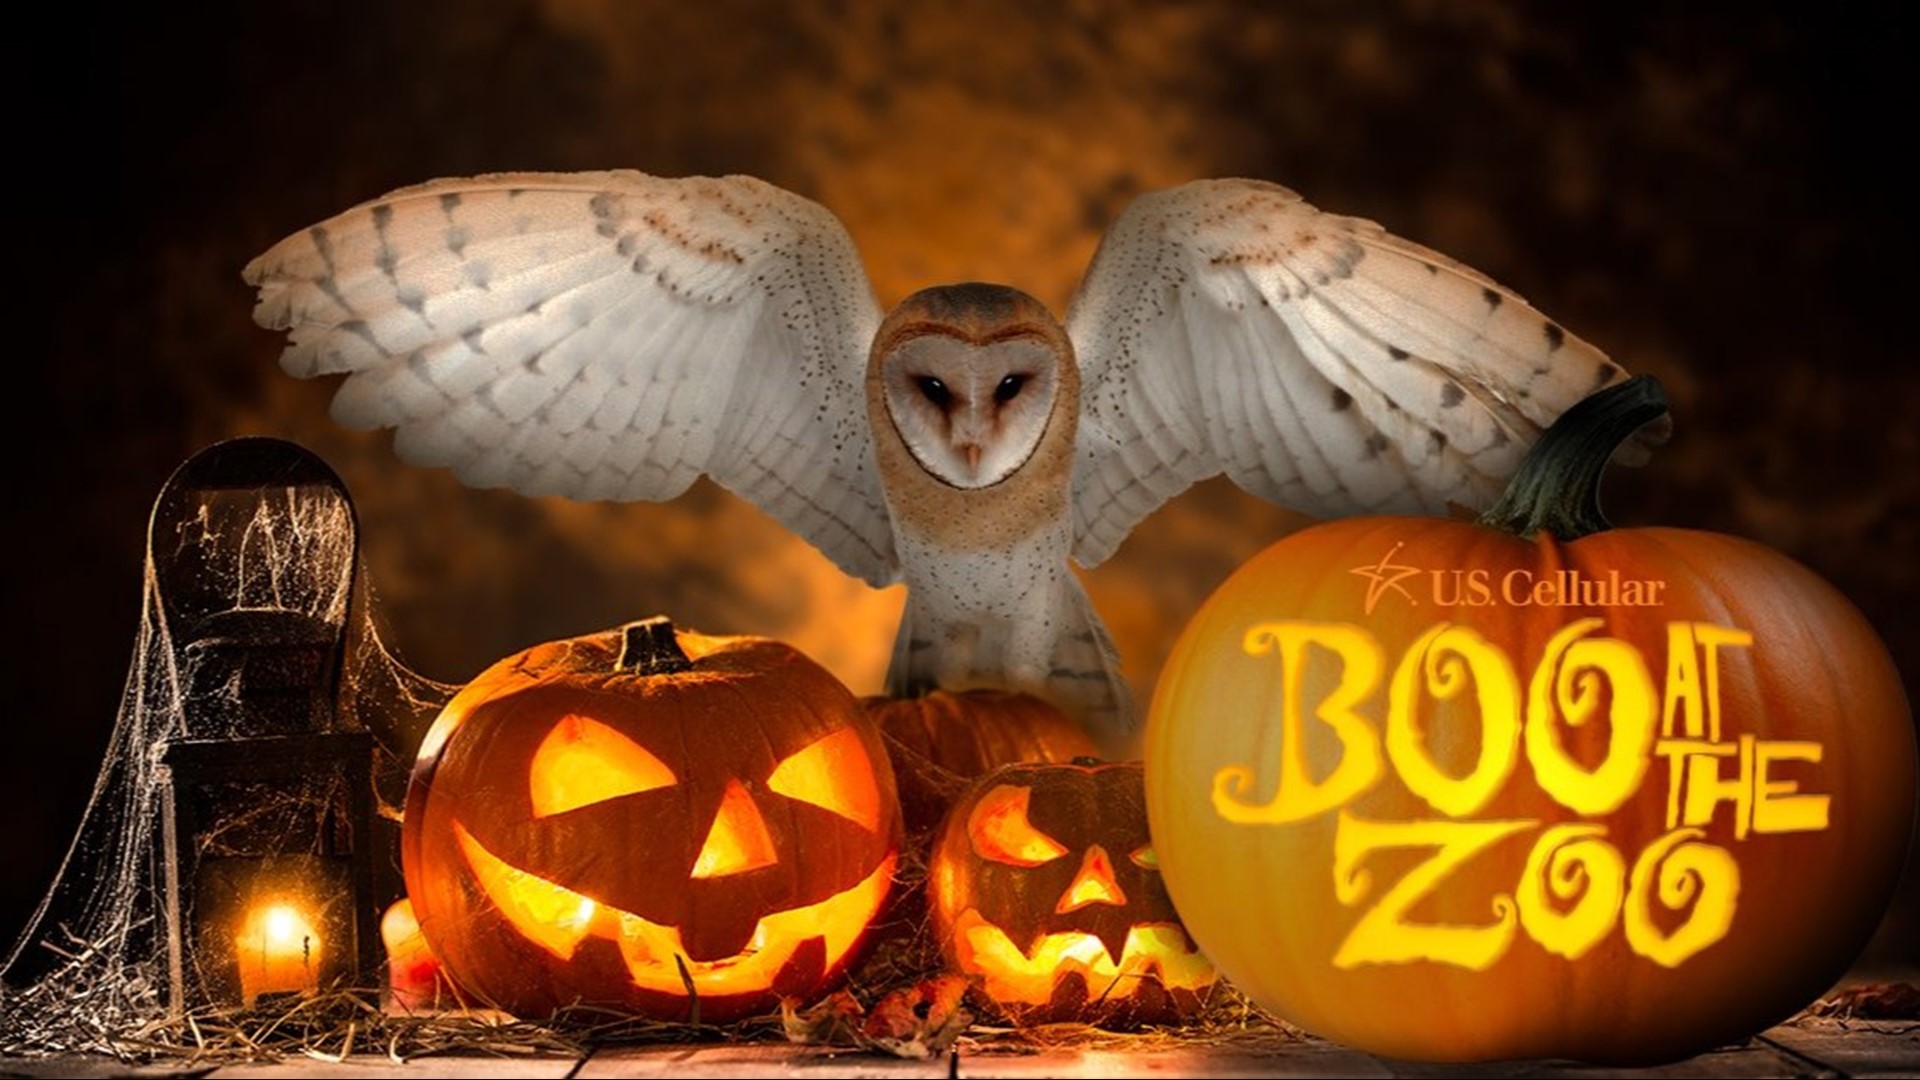 BOO! at the Zoo tickets now on sale